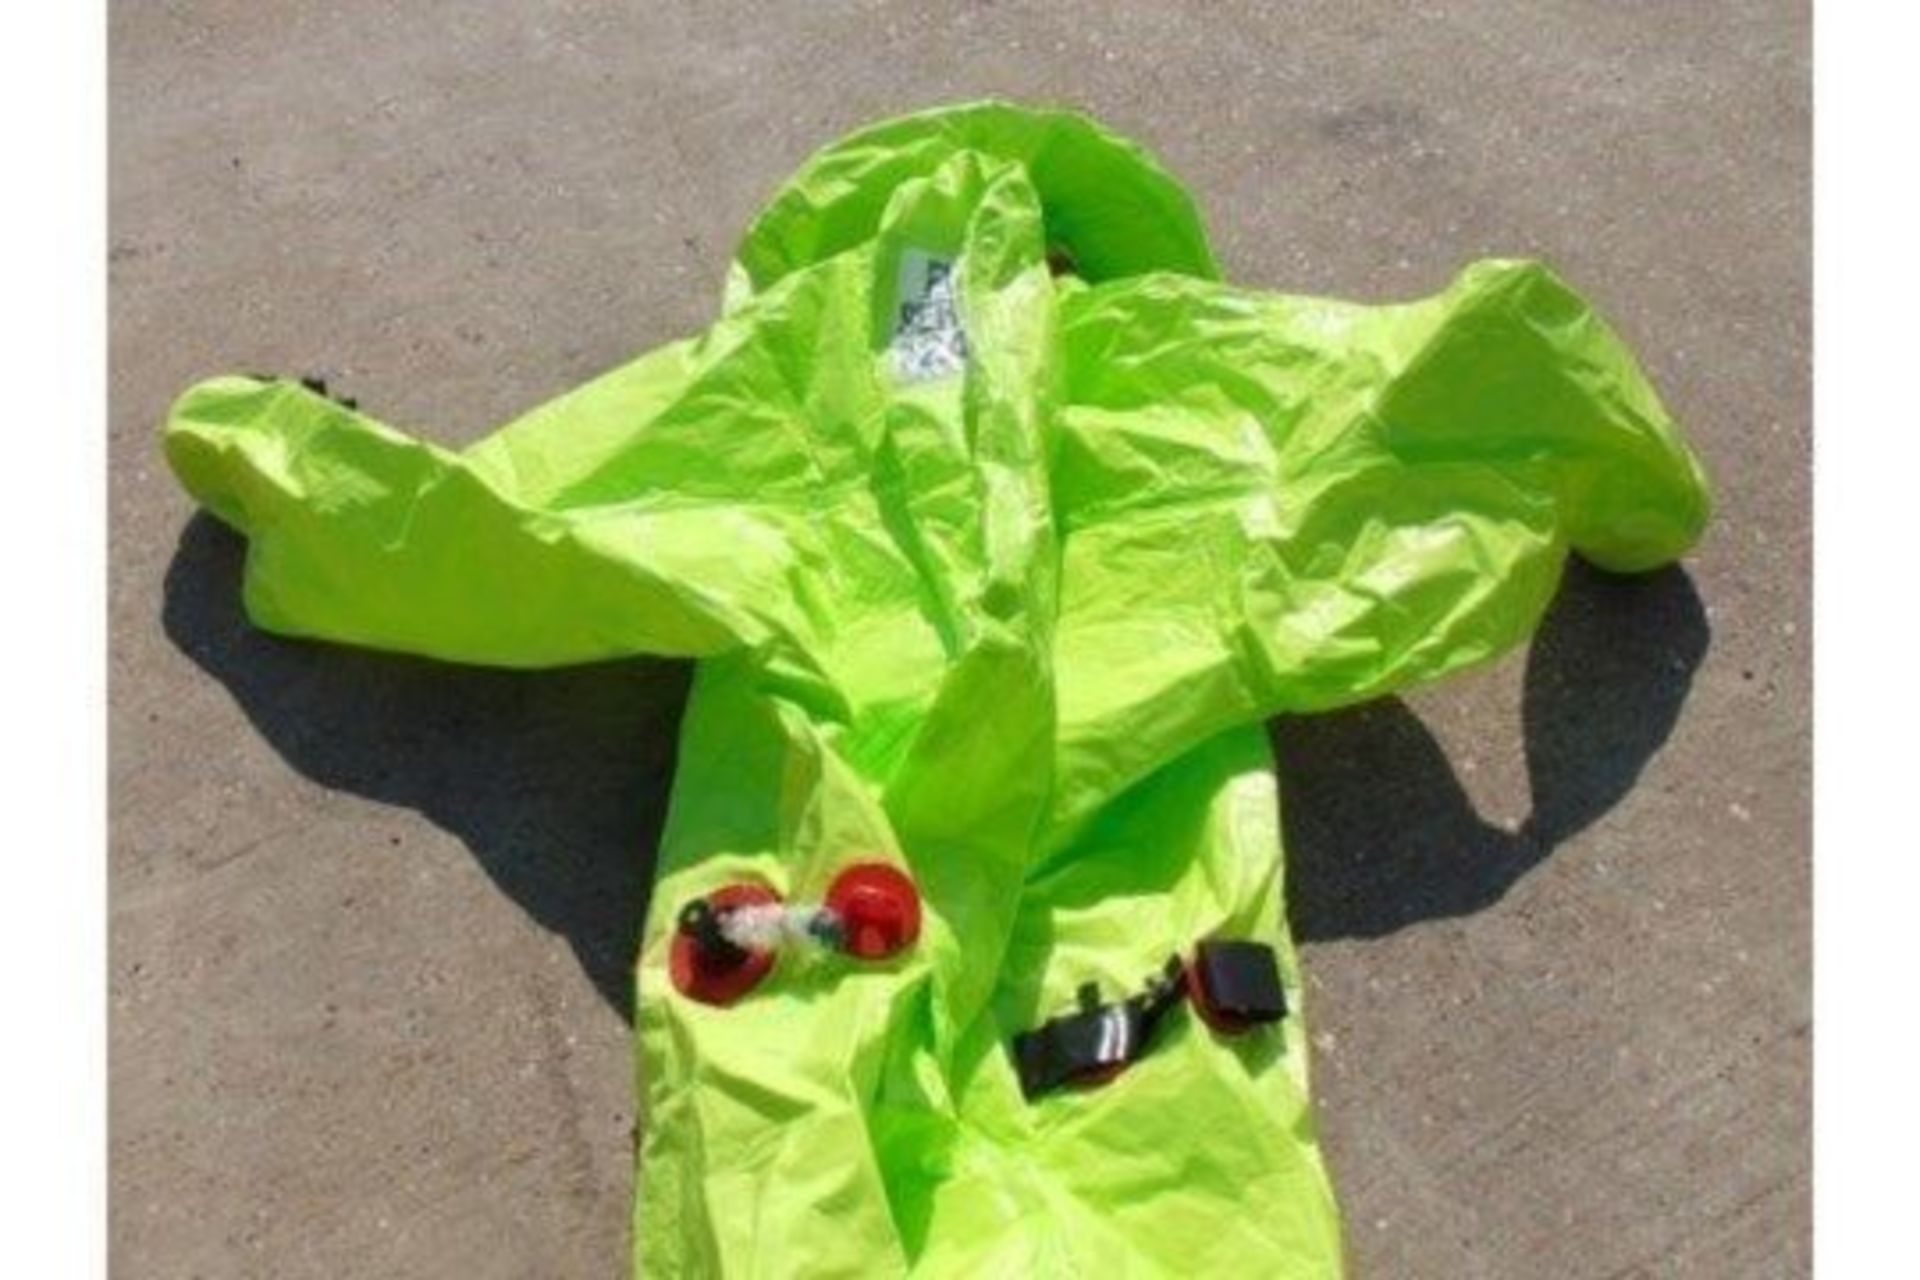 10 x Respirex Tychem TK Gas-Tight Hazmat Suit Type 1A with Attached Boots and Gloves. - Image 4 of 10